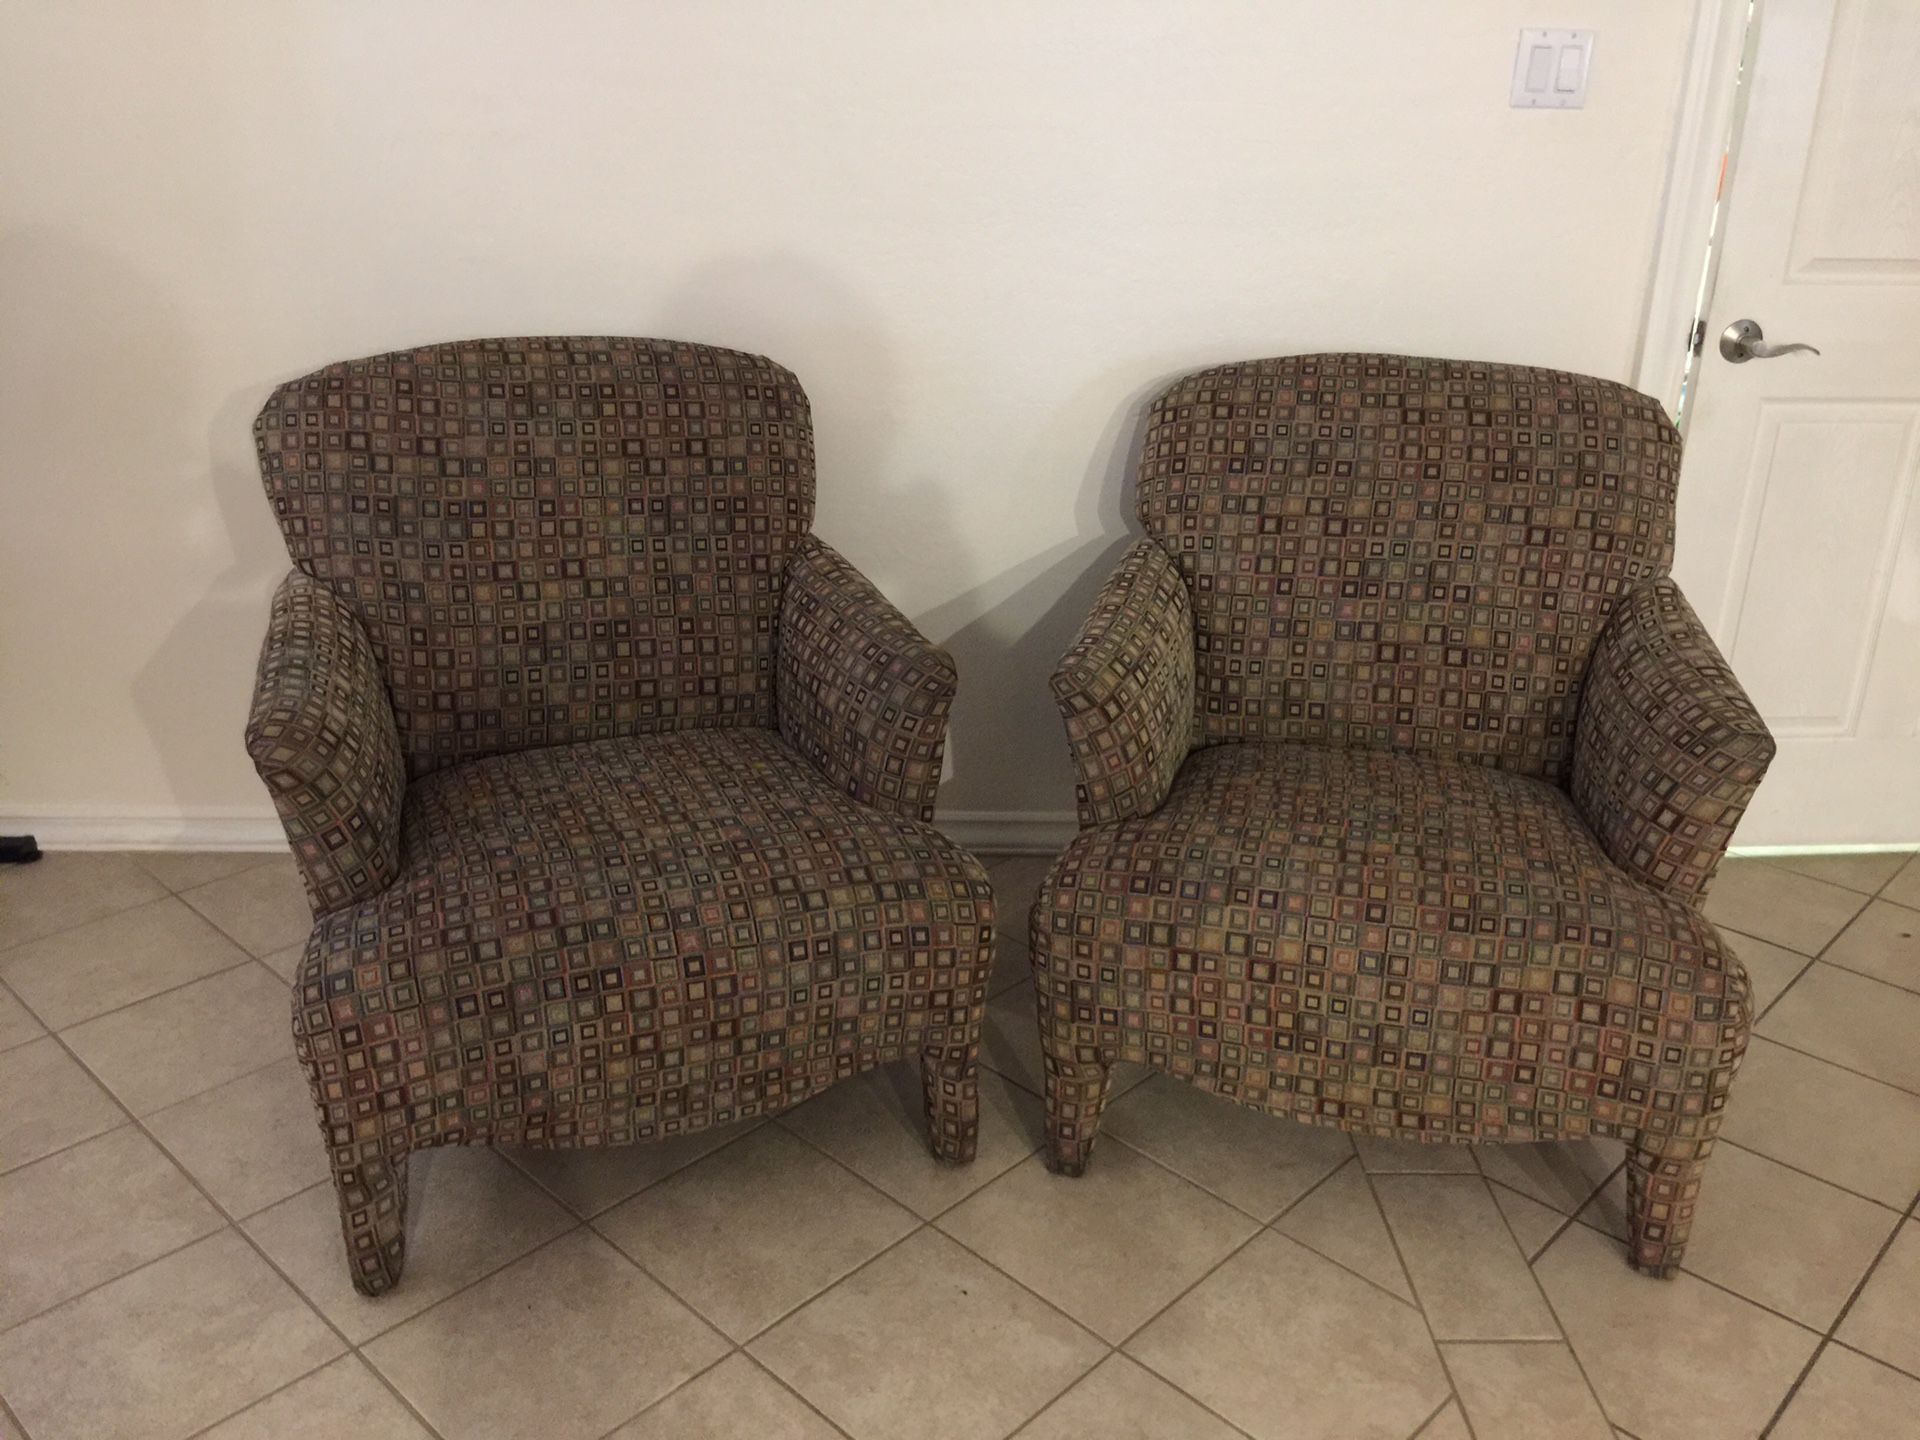 Arm chairs